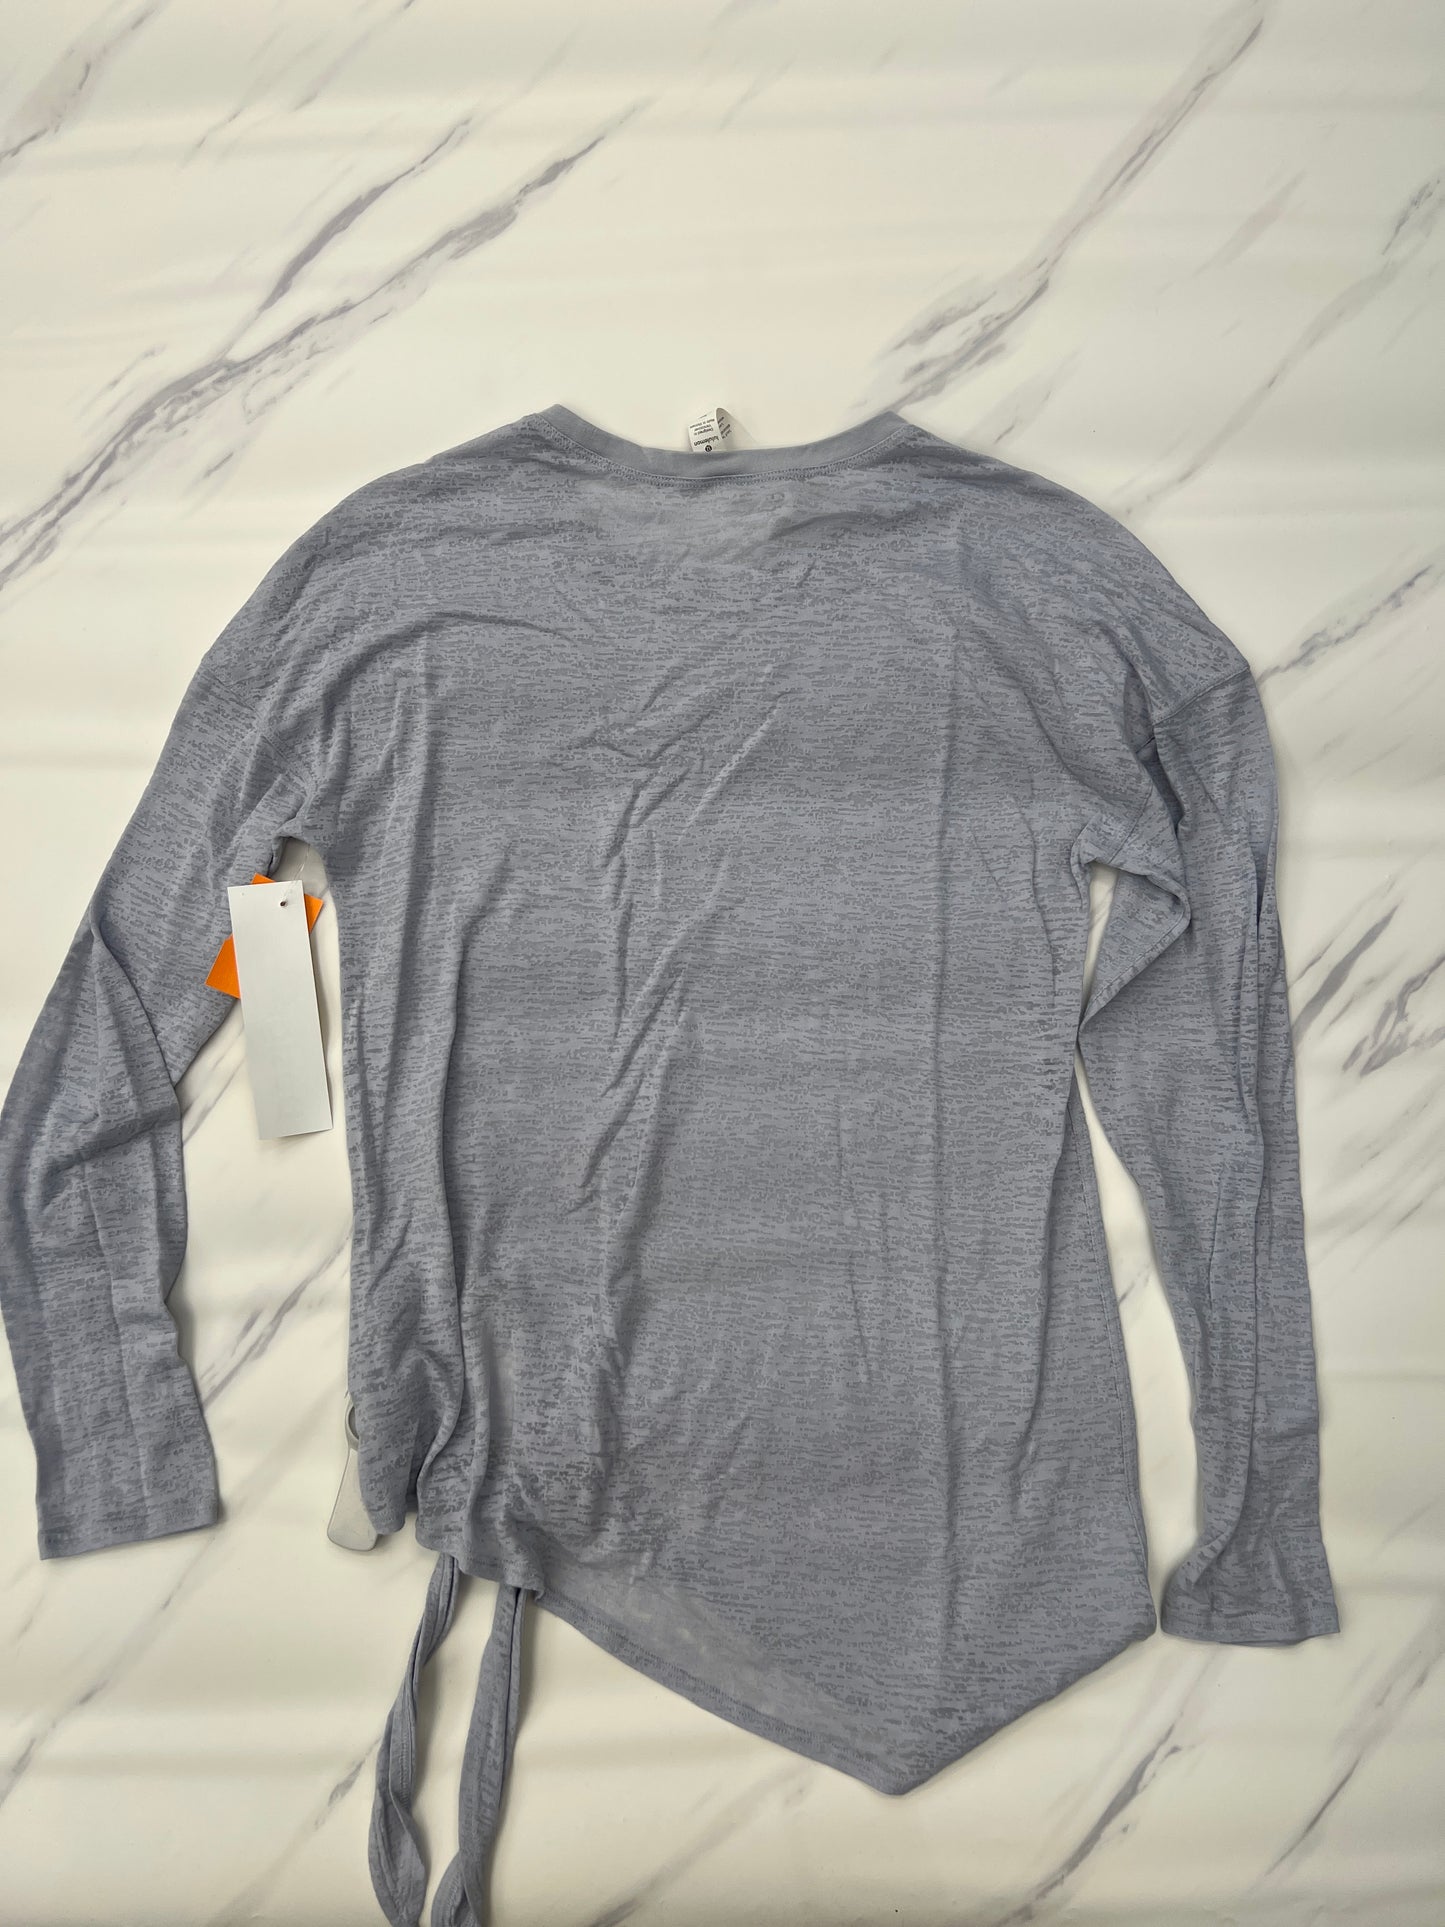 Athletic Top Long Sleeve Collar By Lululemon  Size: 2